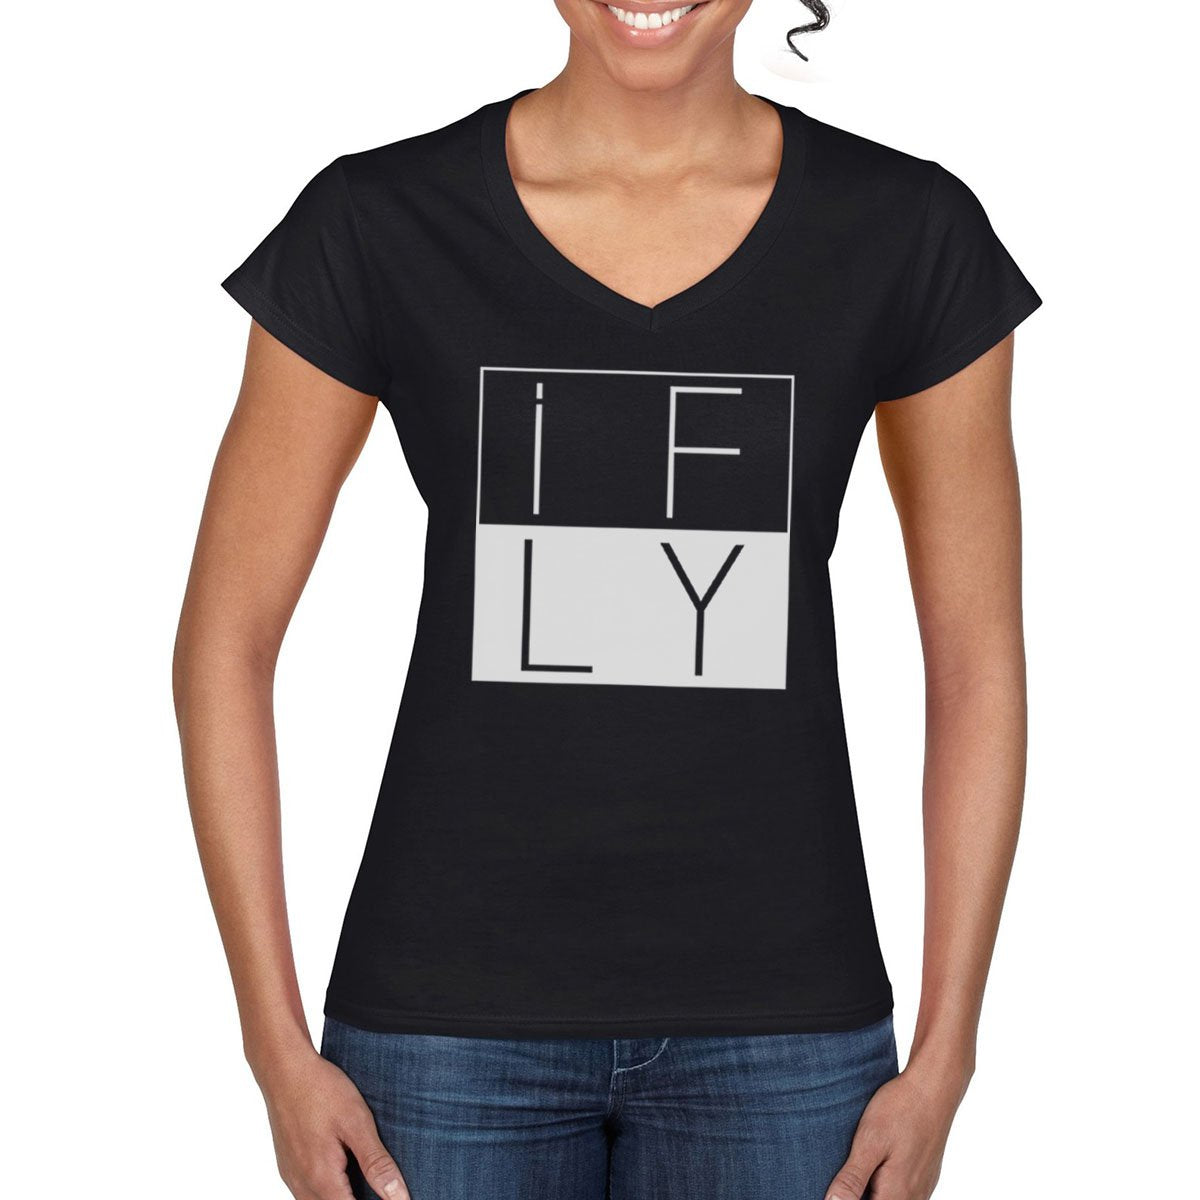 Women’s IFLY semi-fitted V-neck T-Shirt